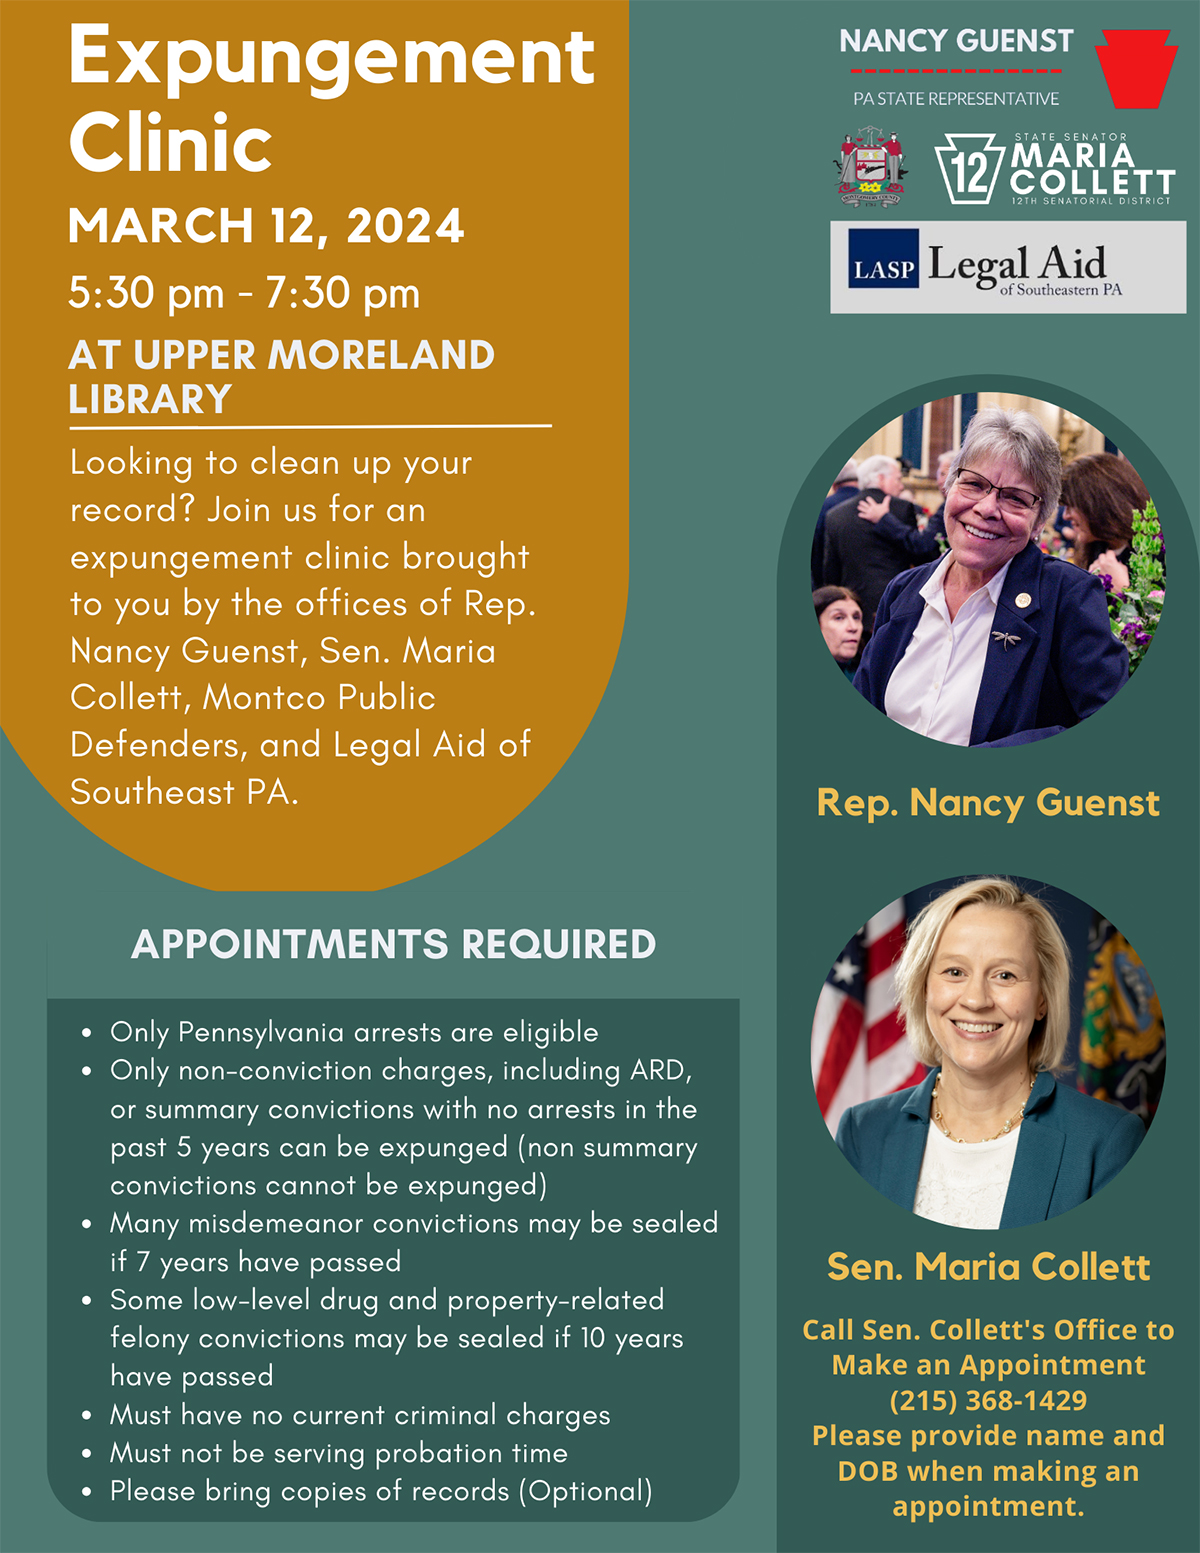 Expungement Clinic - March 12, 2024